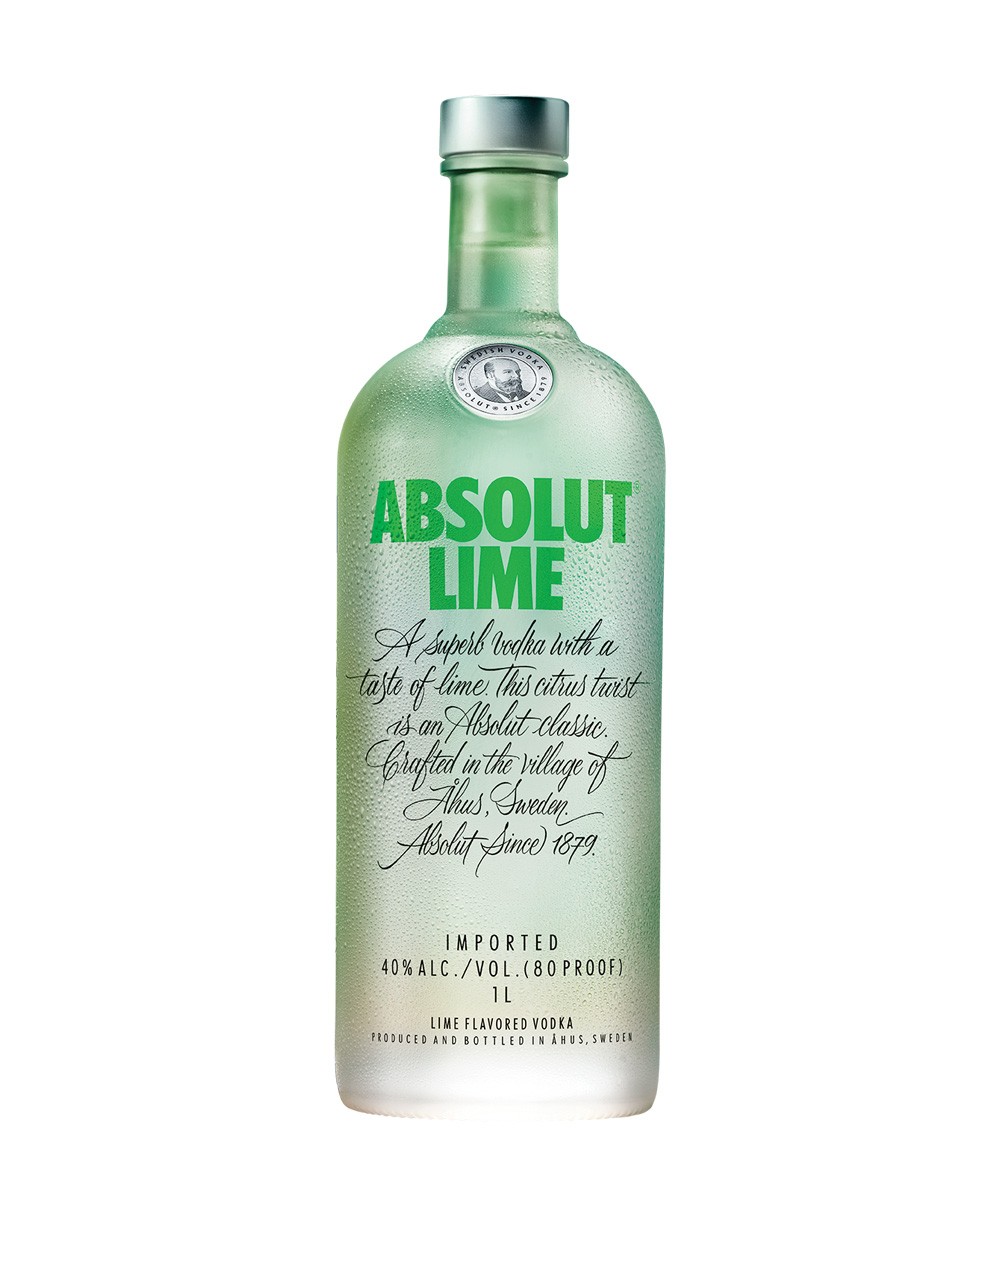 Absolut Lime Vodka | Buy Online or Send as a Gift | ReserveBar